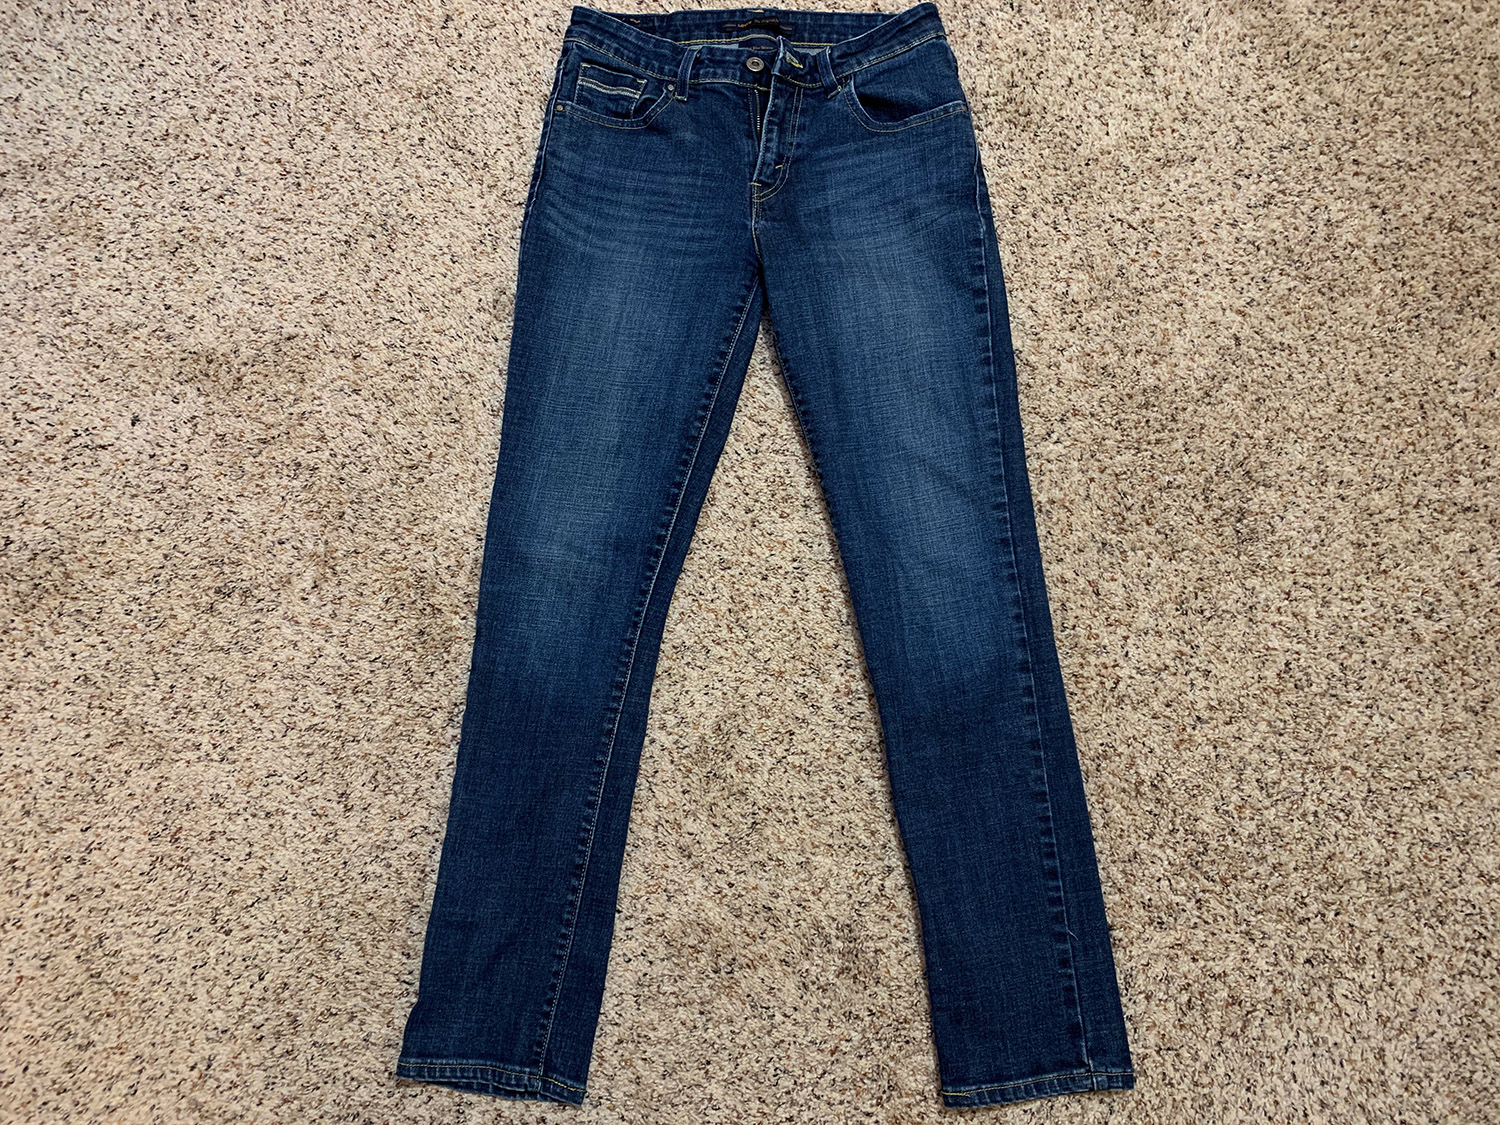 Levis Womens Mid Rise Skinny Jeans Size 8M